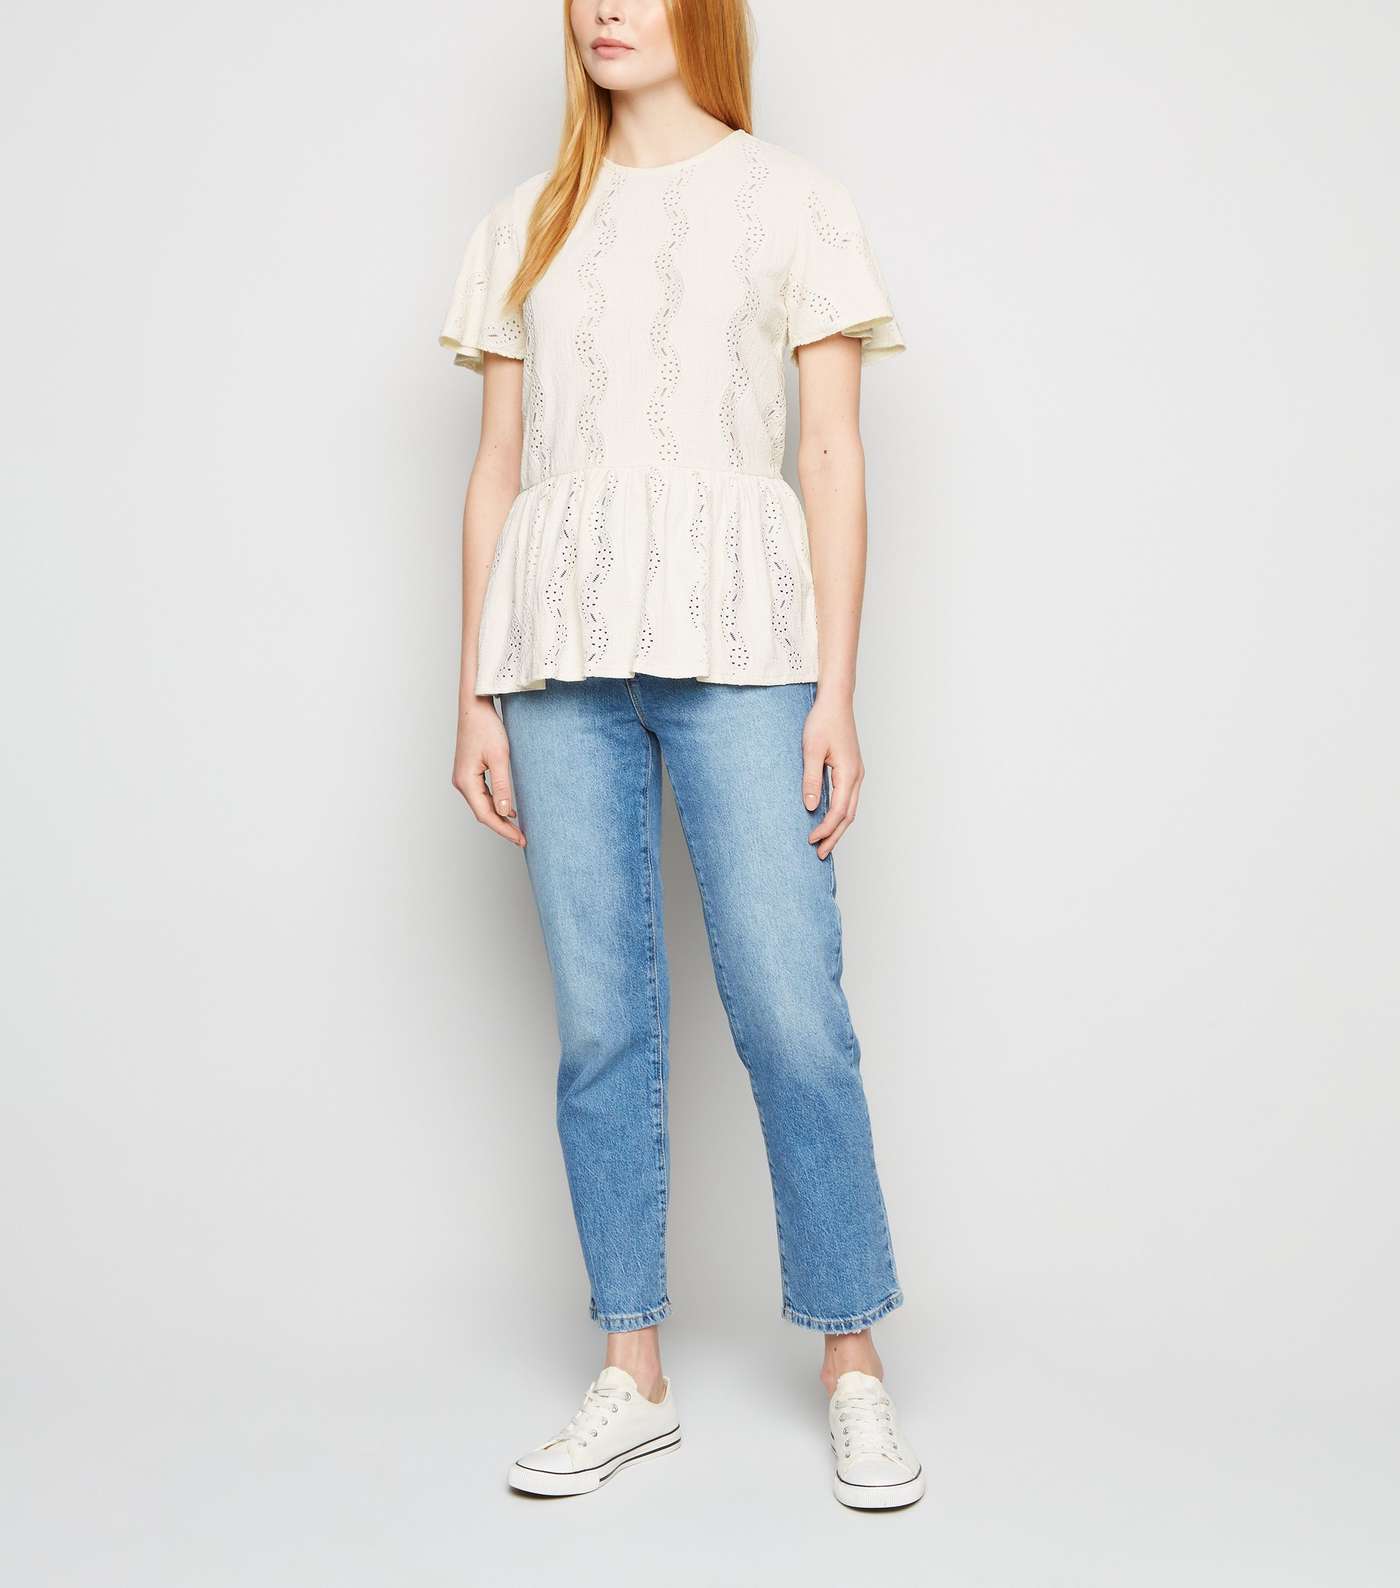 Off White Broderie Textured Peplum Top Image 2